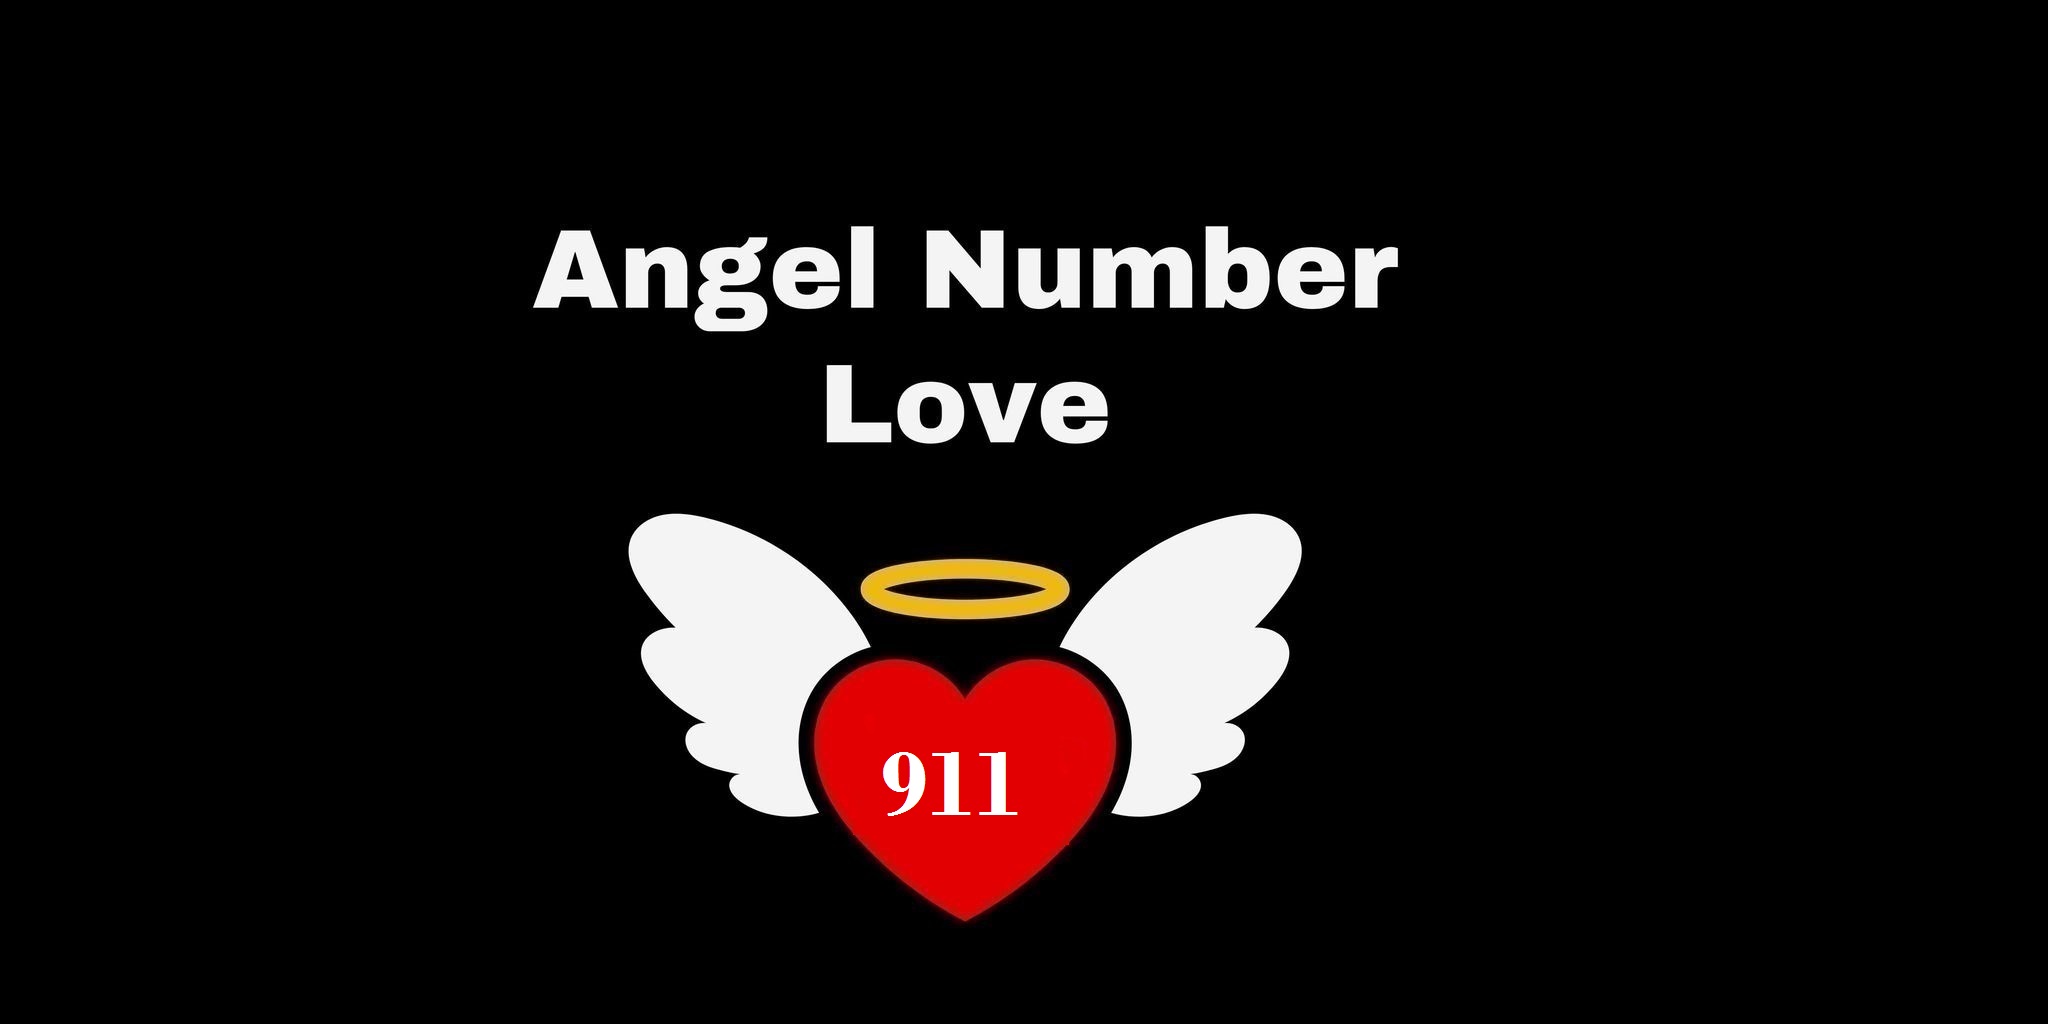 911 Angel Number Meaning In Love